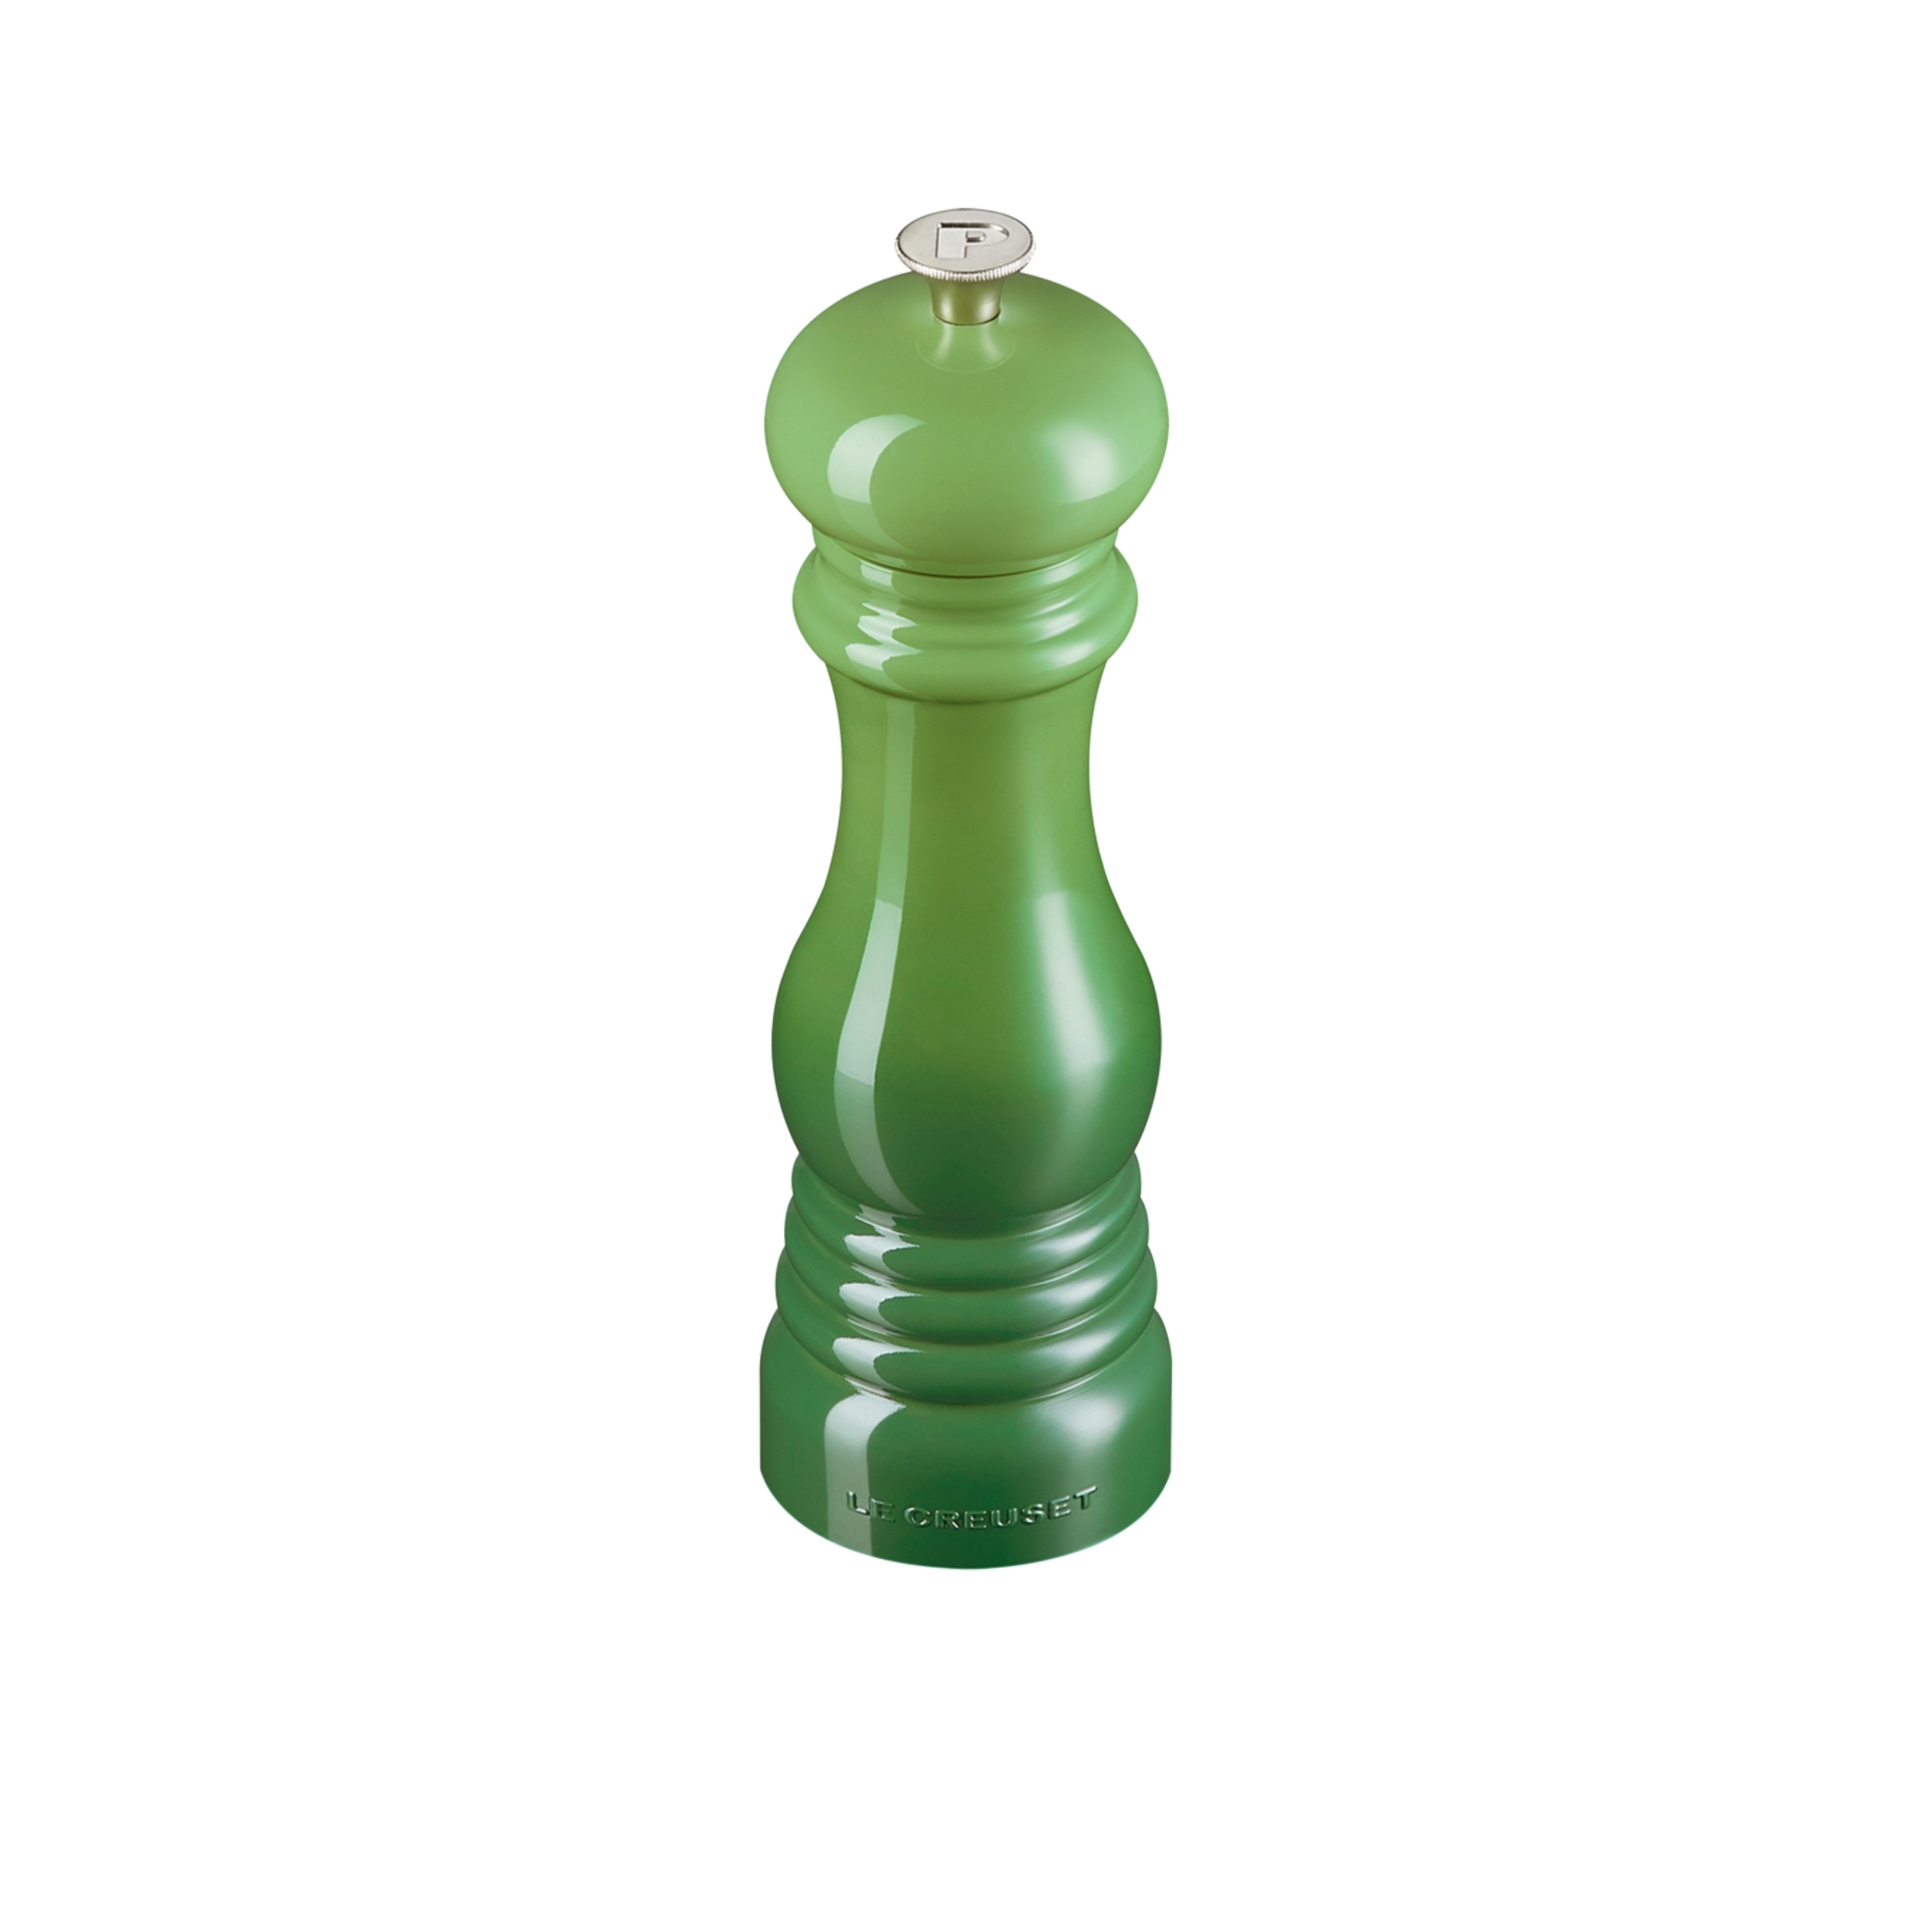 Le Creuset Classic Pepper Mill 21cm Bamboo Green Image 1